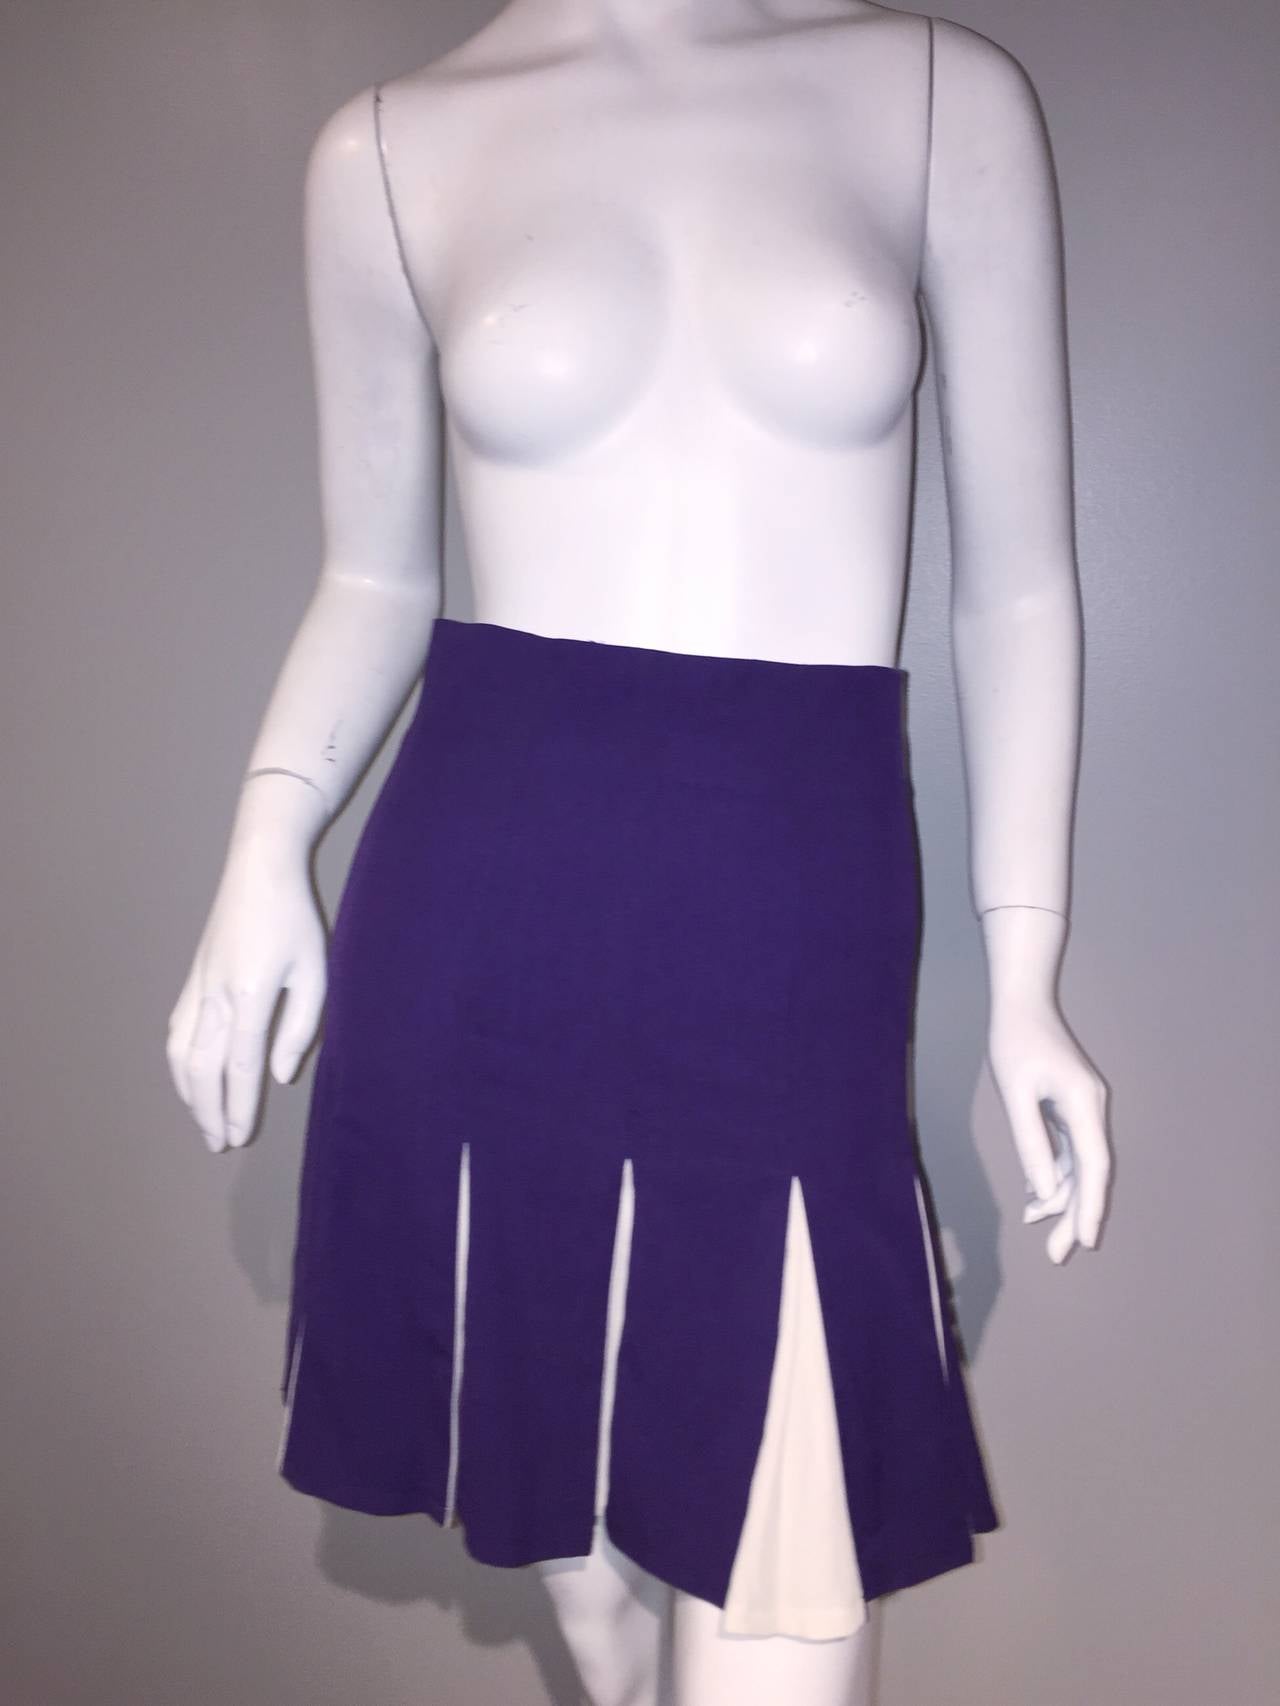 Women's 1990s Plein Sud High Waisted Purple + White Pleated Skirt - Made in France